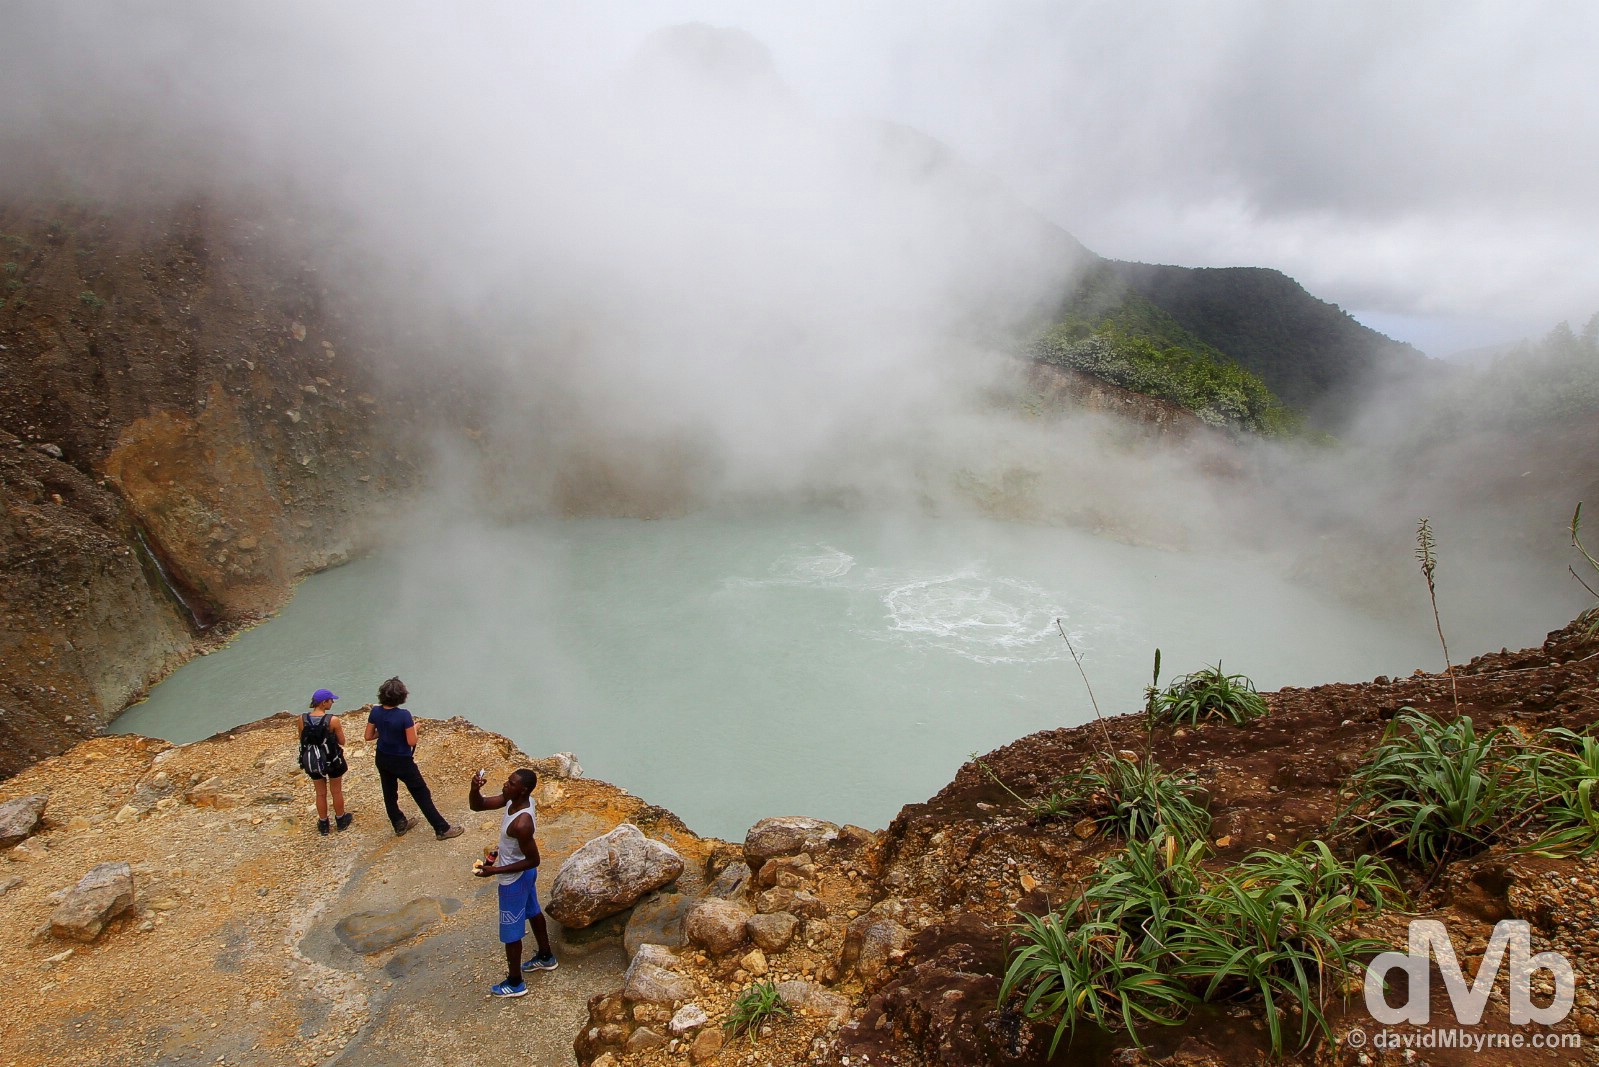 Overlooking a bubbling Boiling Lake in Morne Trois Pitons National Park, Dominica, Lesser Antilles. June 11, 2015.